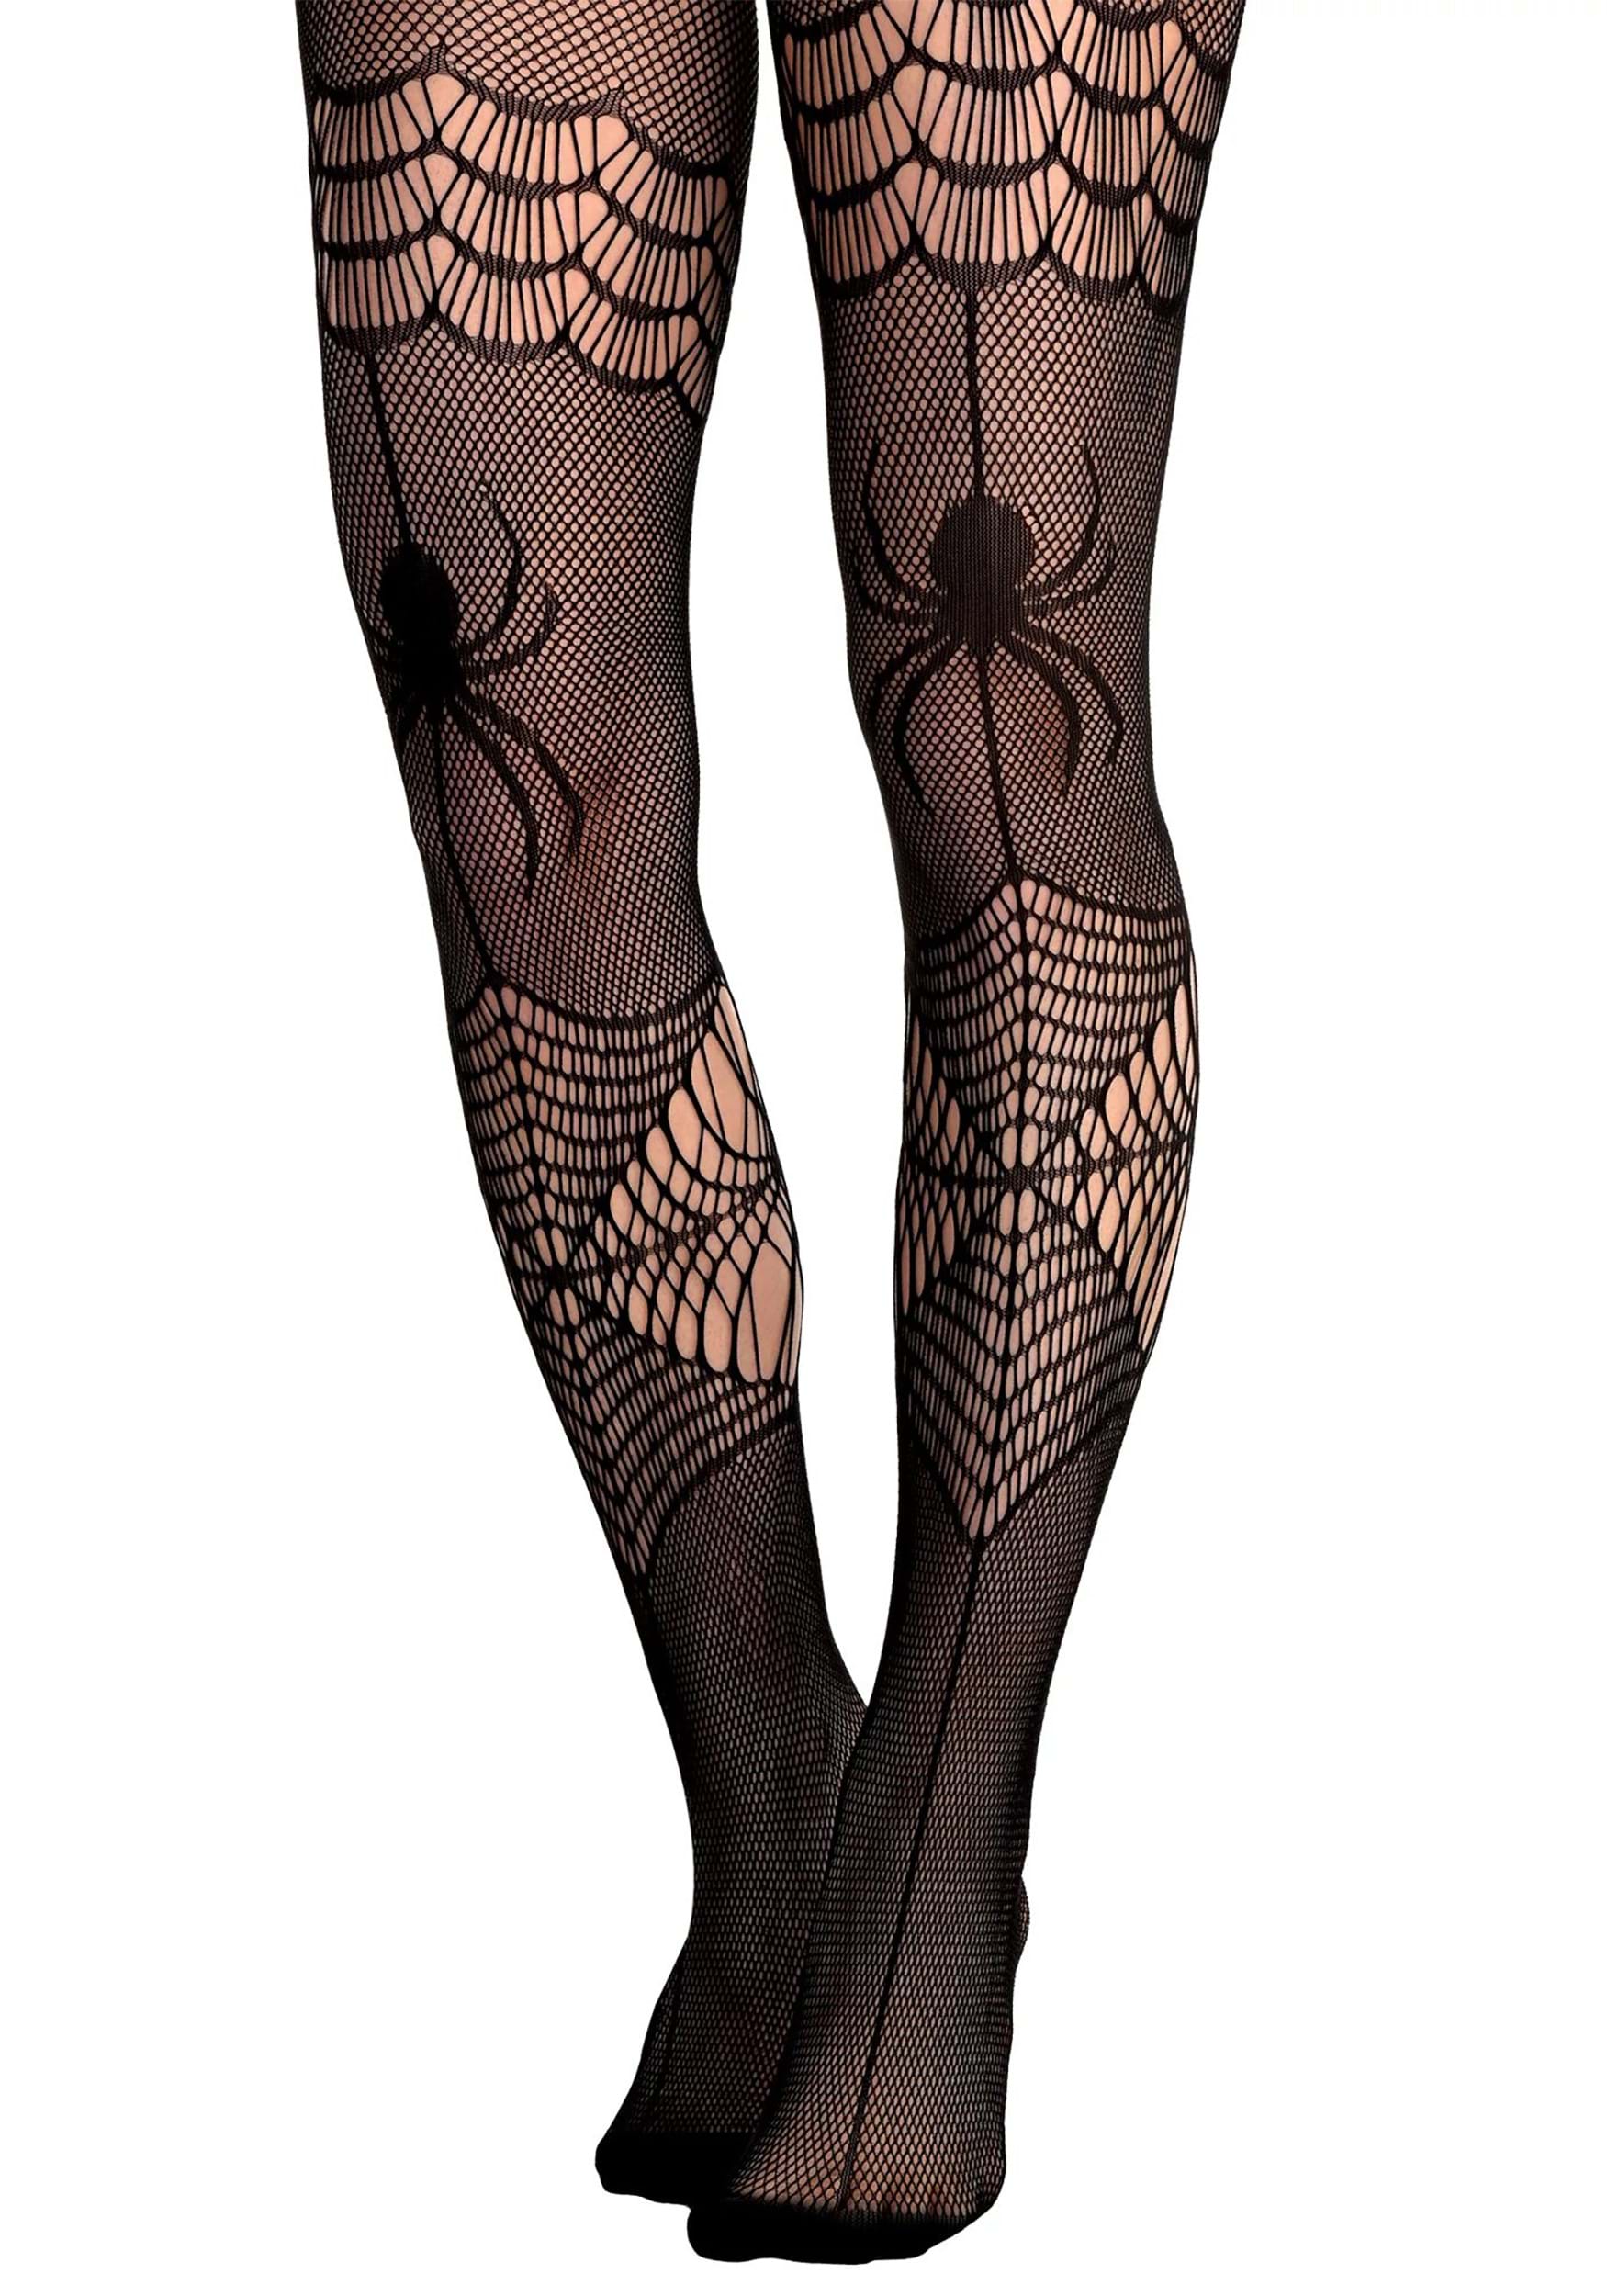 Spider & Webs Stockings